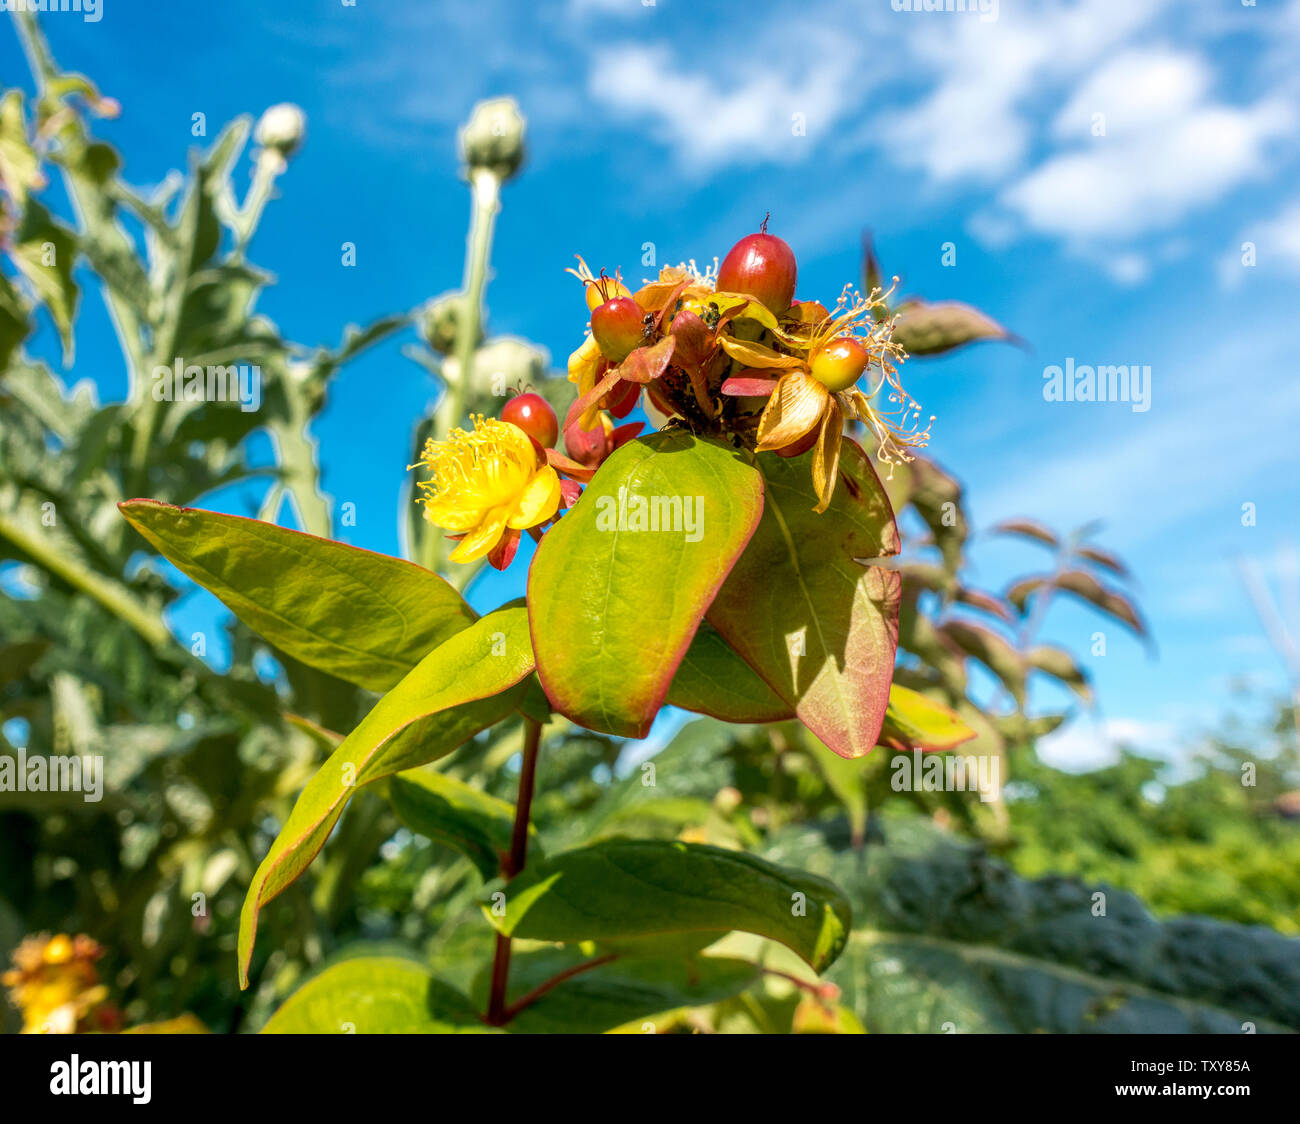 St Johns Wort plant and flowers with early berries forming Stock Photo